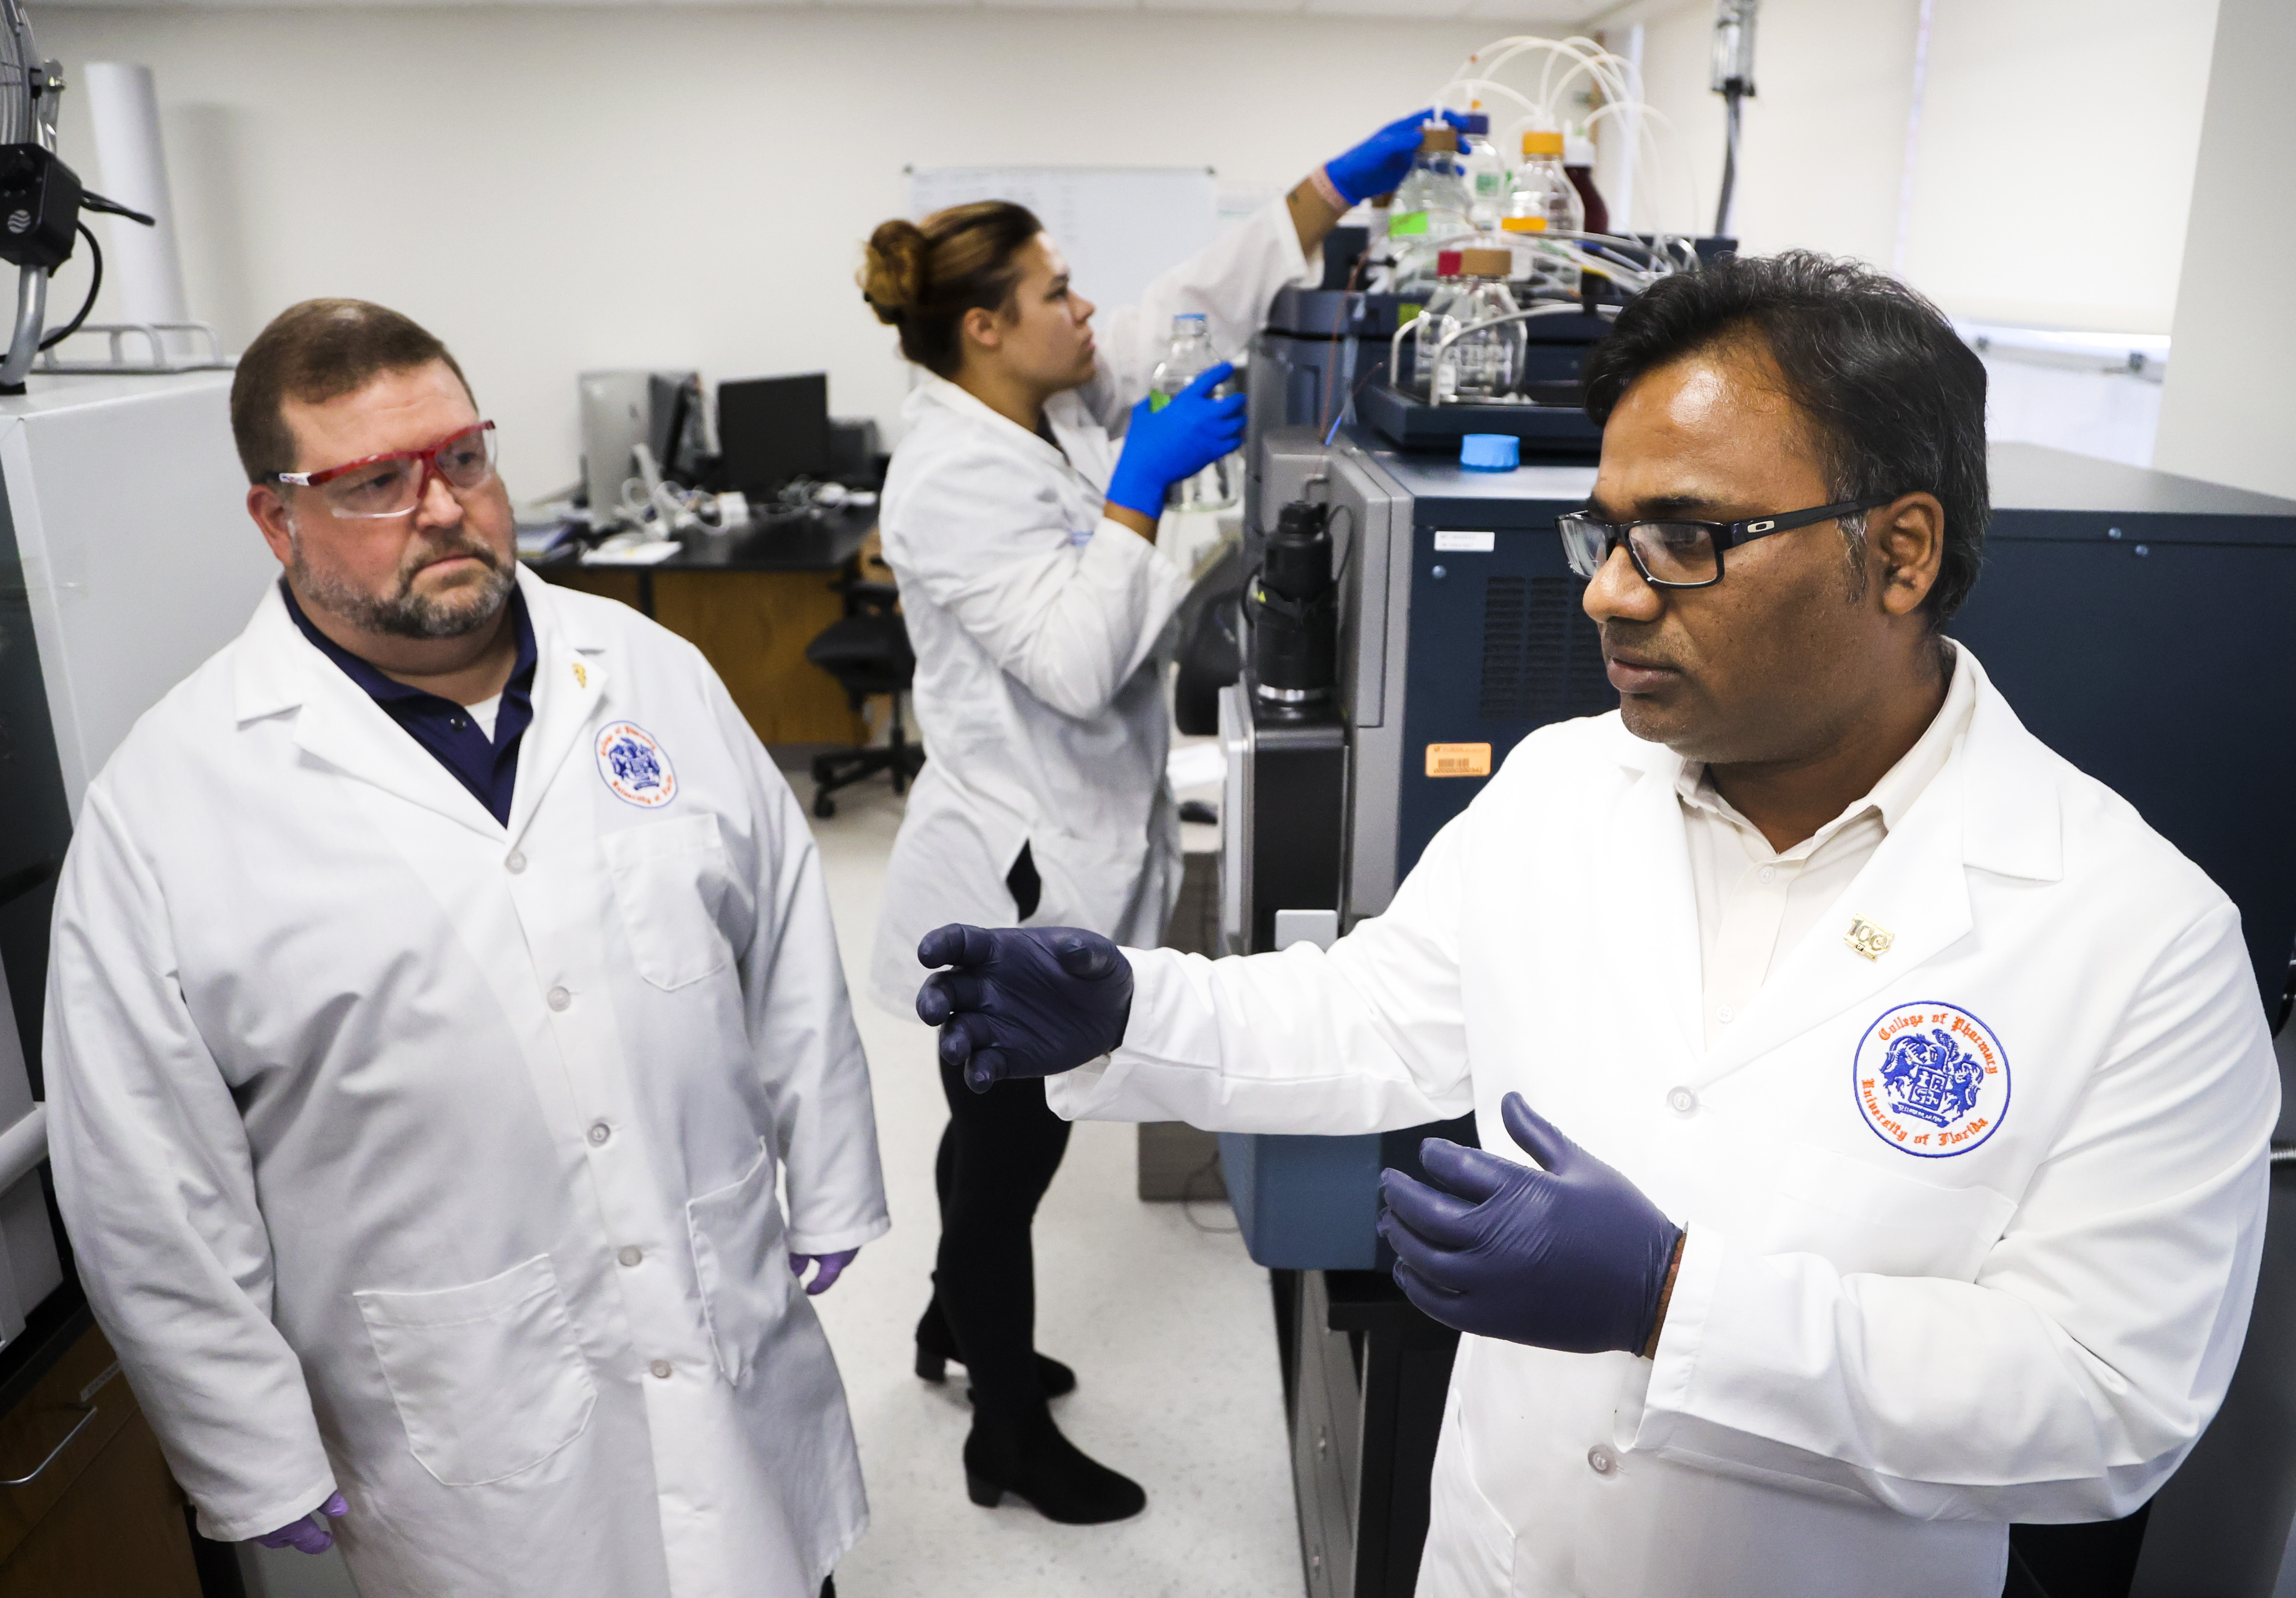 Christopher McCurdy, left, and Abhisheak Sharma study kratom at the University of Florida. They’re worried about concentrated forms of the herb, including power-packed liquid shots.